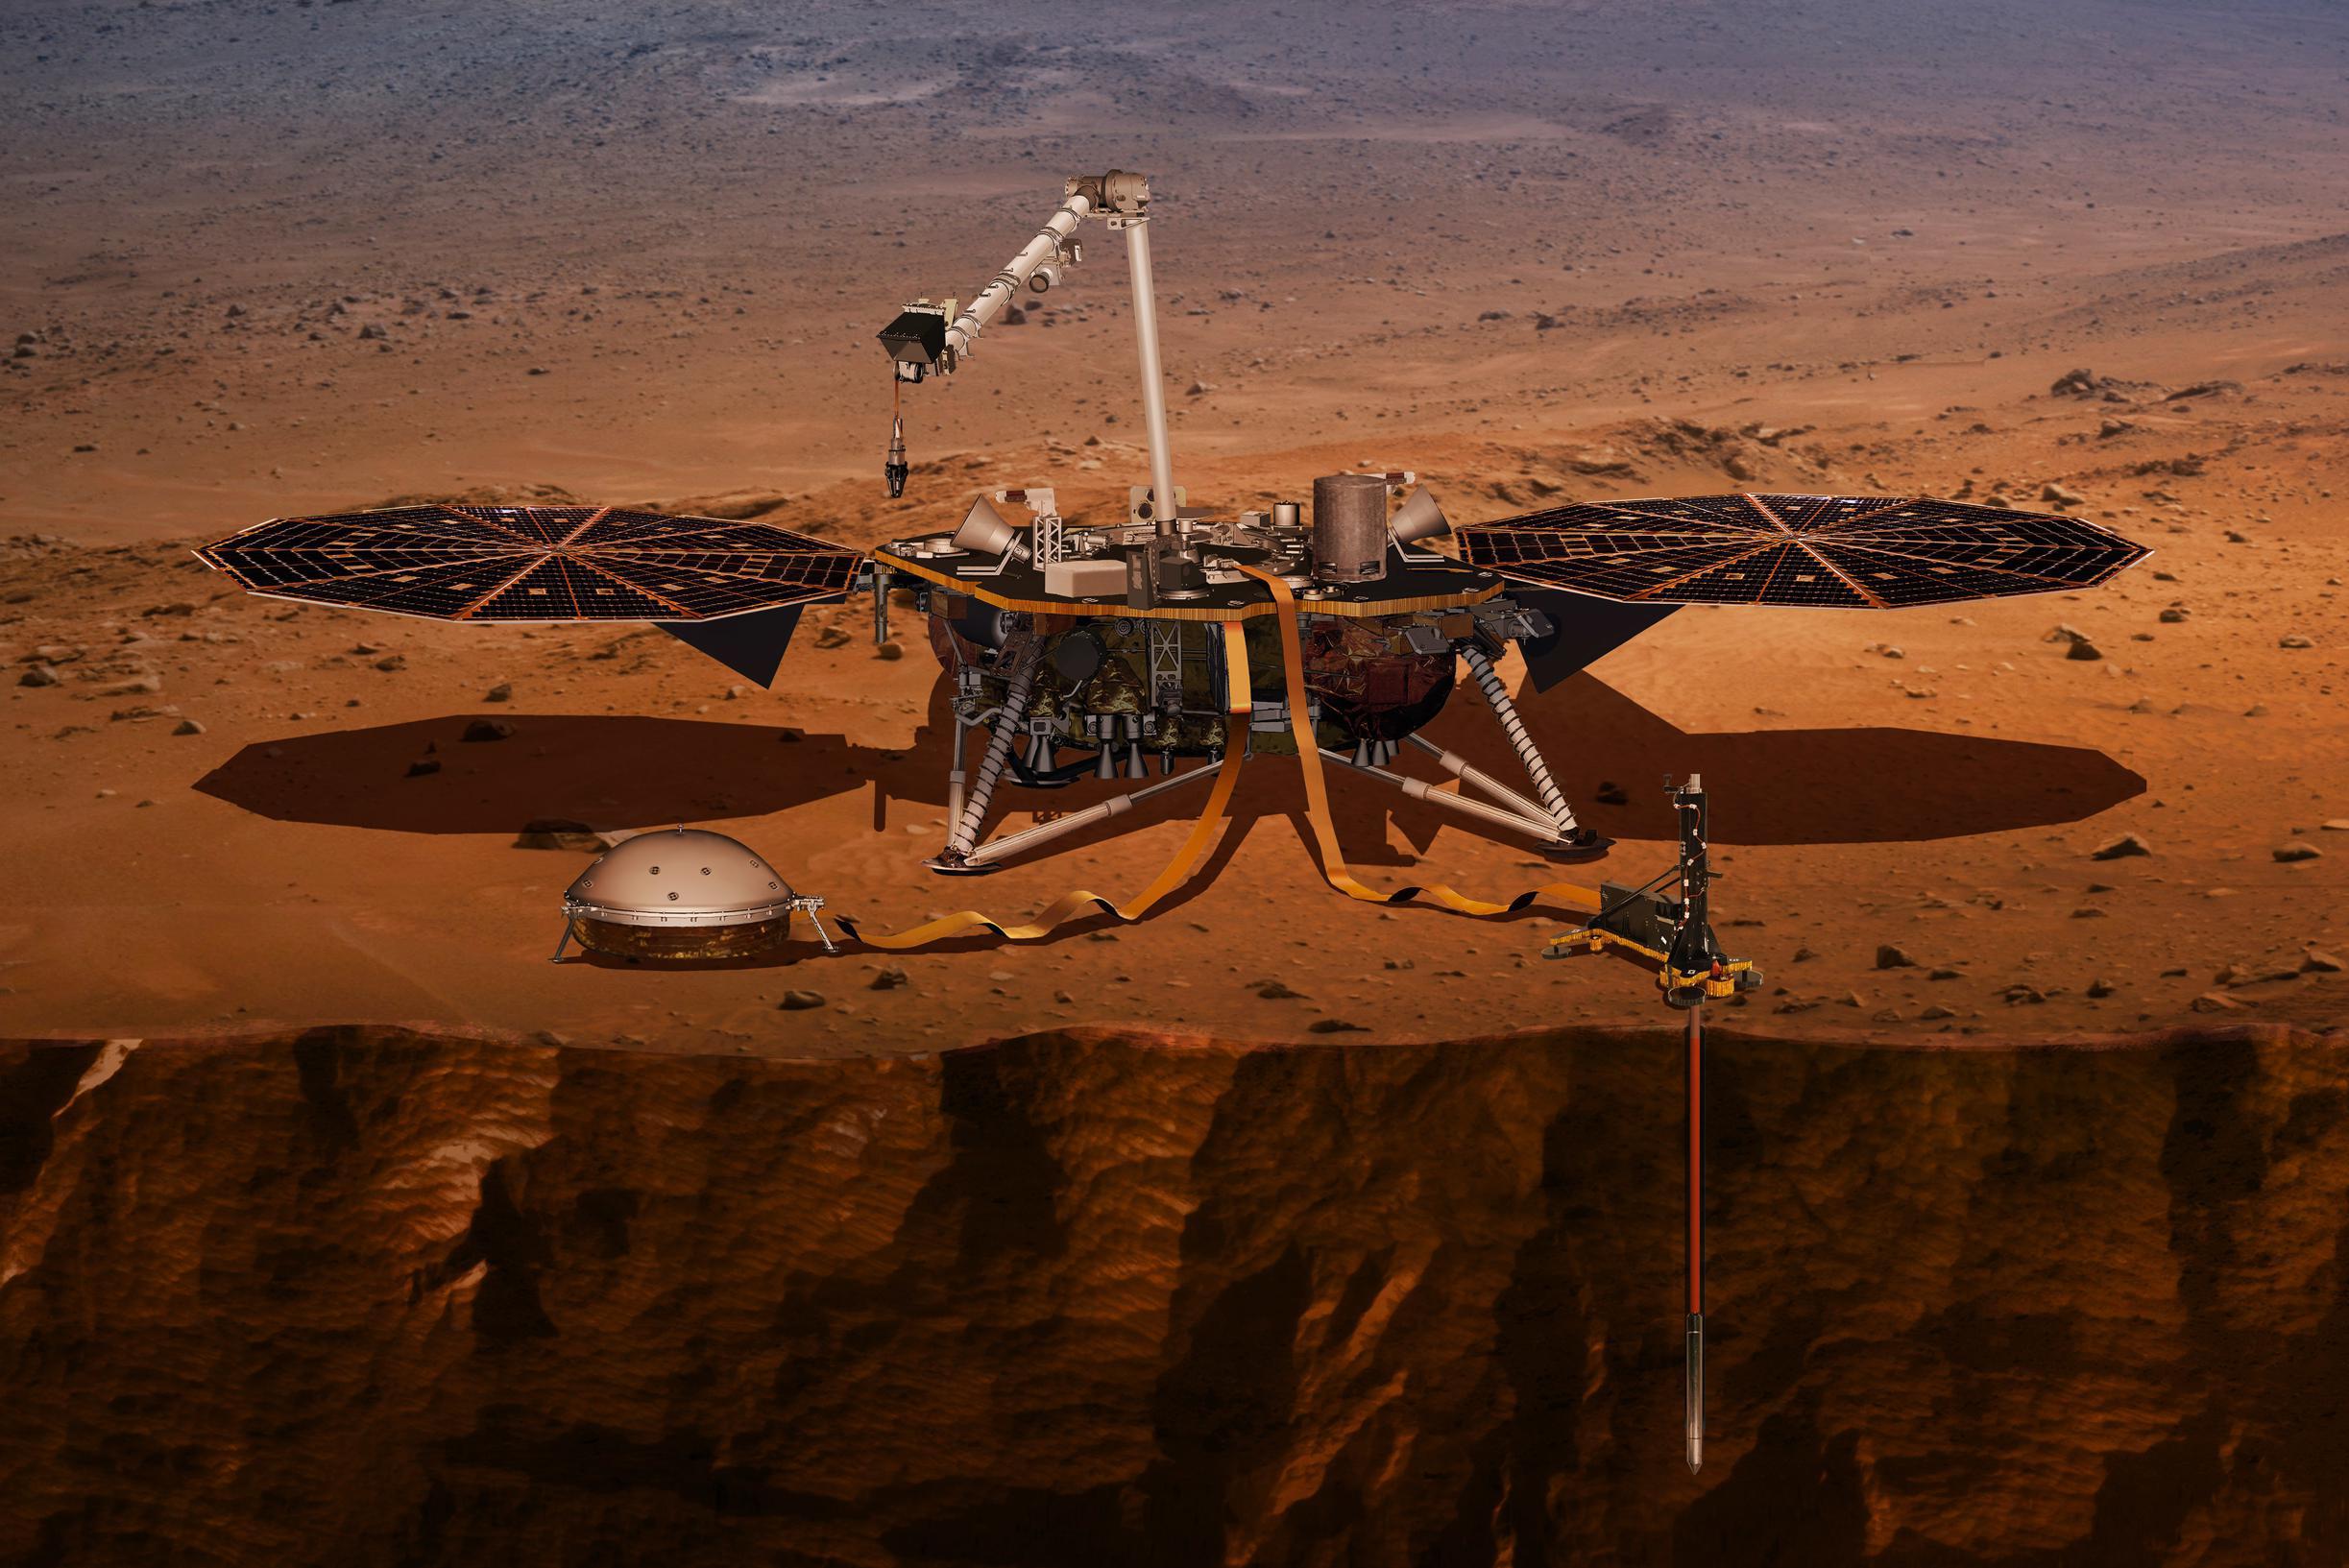 Mars Lander Sends A Final Sentimental Message From The Red Planet: ‘Don’t Worry About Me’